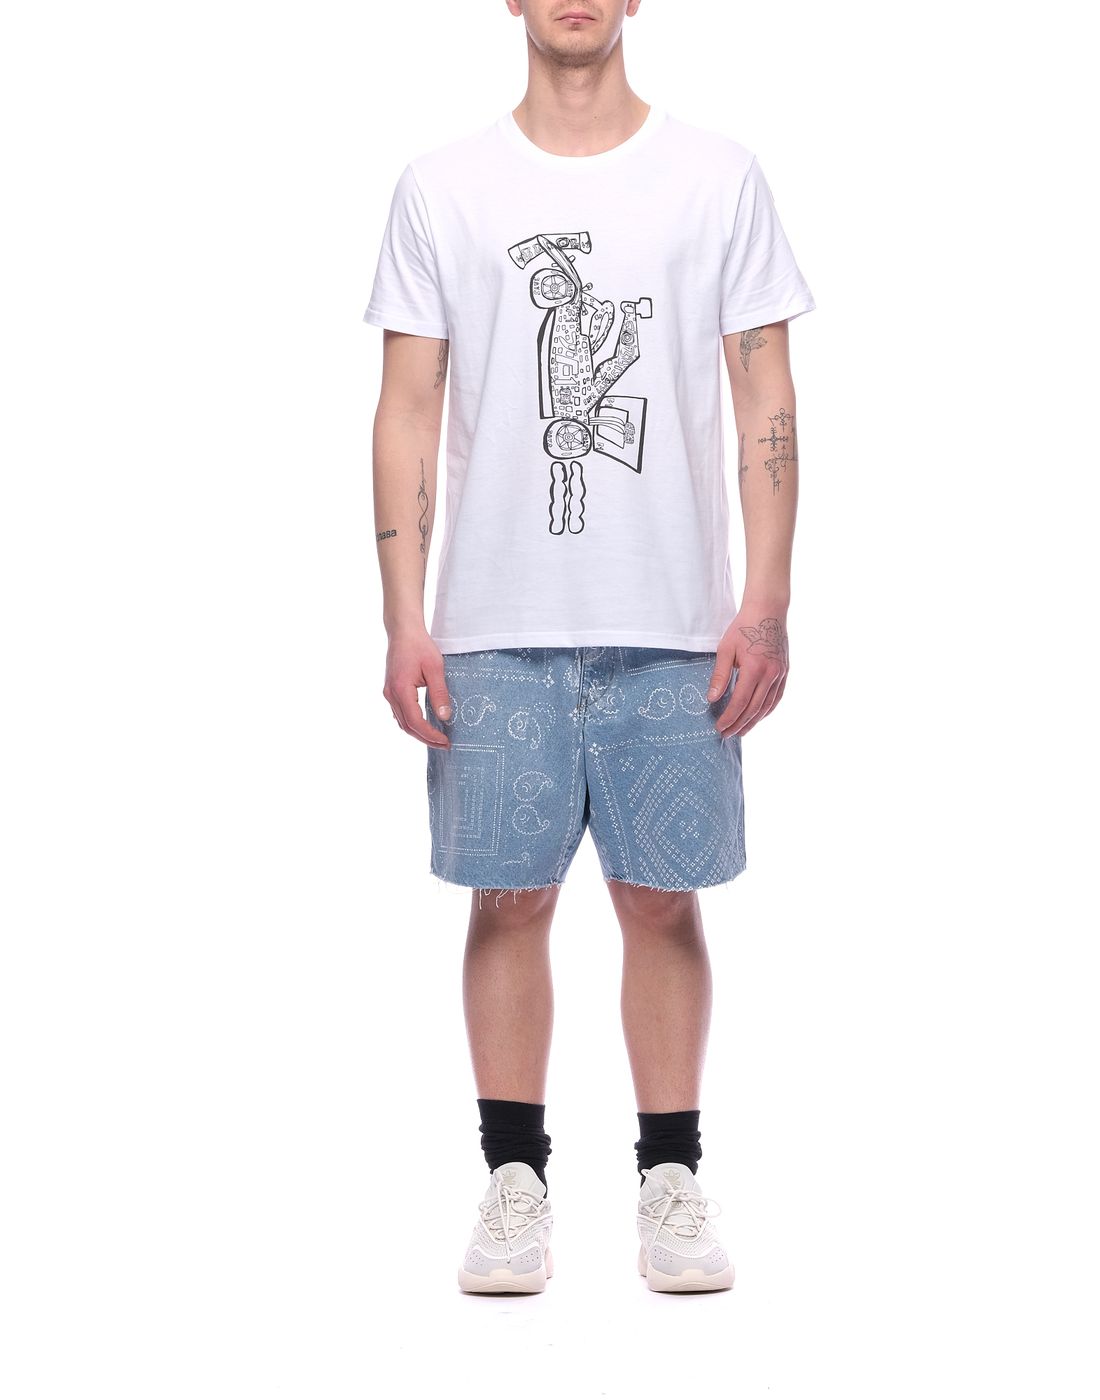 T-shirt for man Sporty 004 White ONELAB